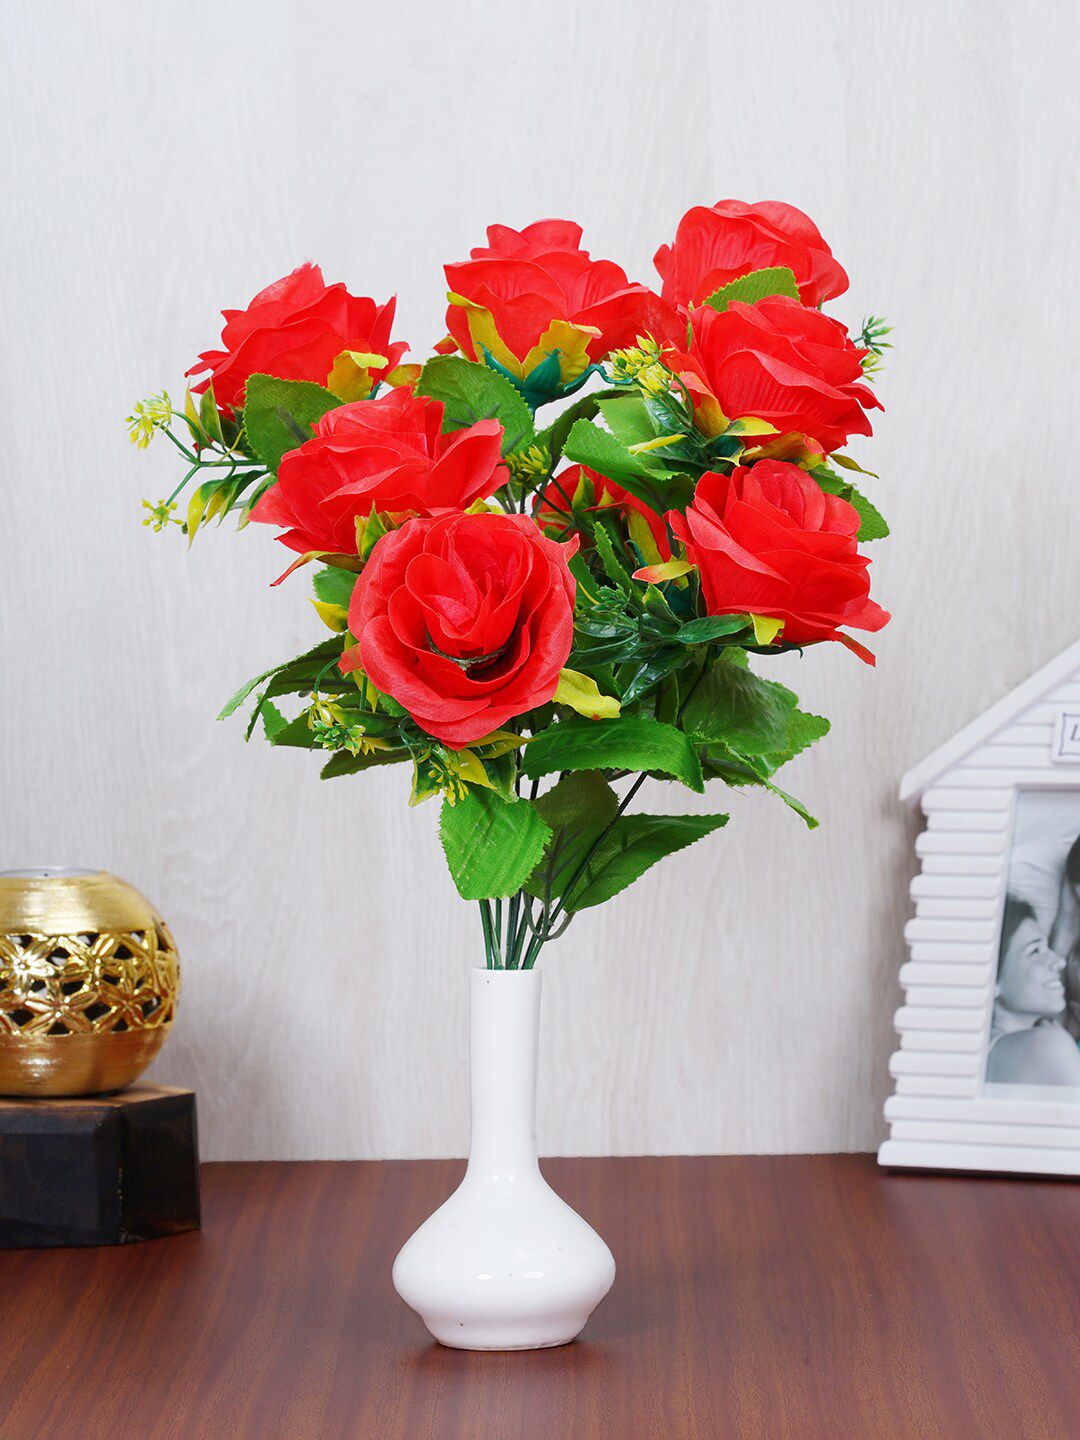 Dekorly Red & White Artificial Flower and Plant for Home and Office Decoration Price in India